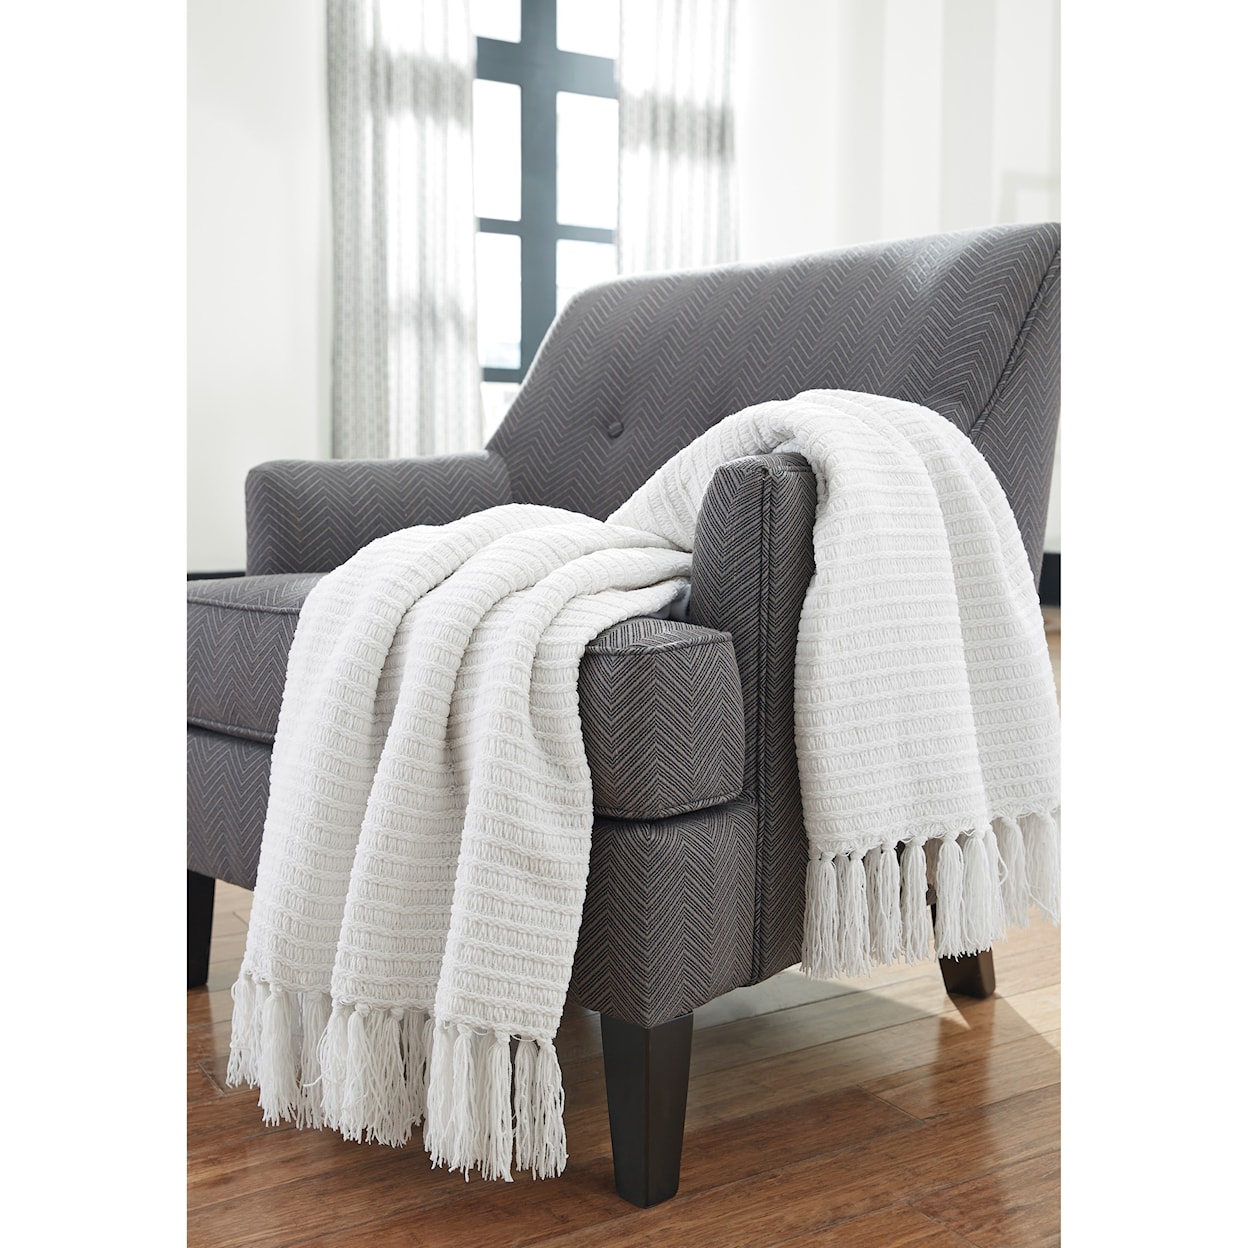 Signature Design by Ashley Furniture Throws Santino - Ivory Throw